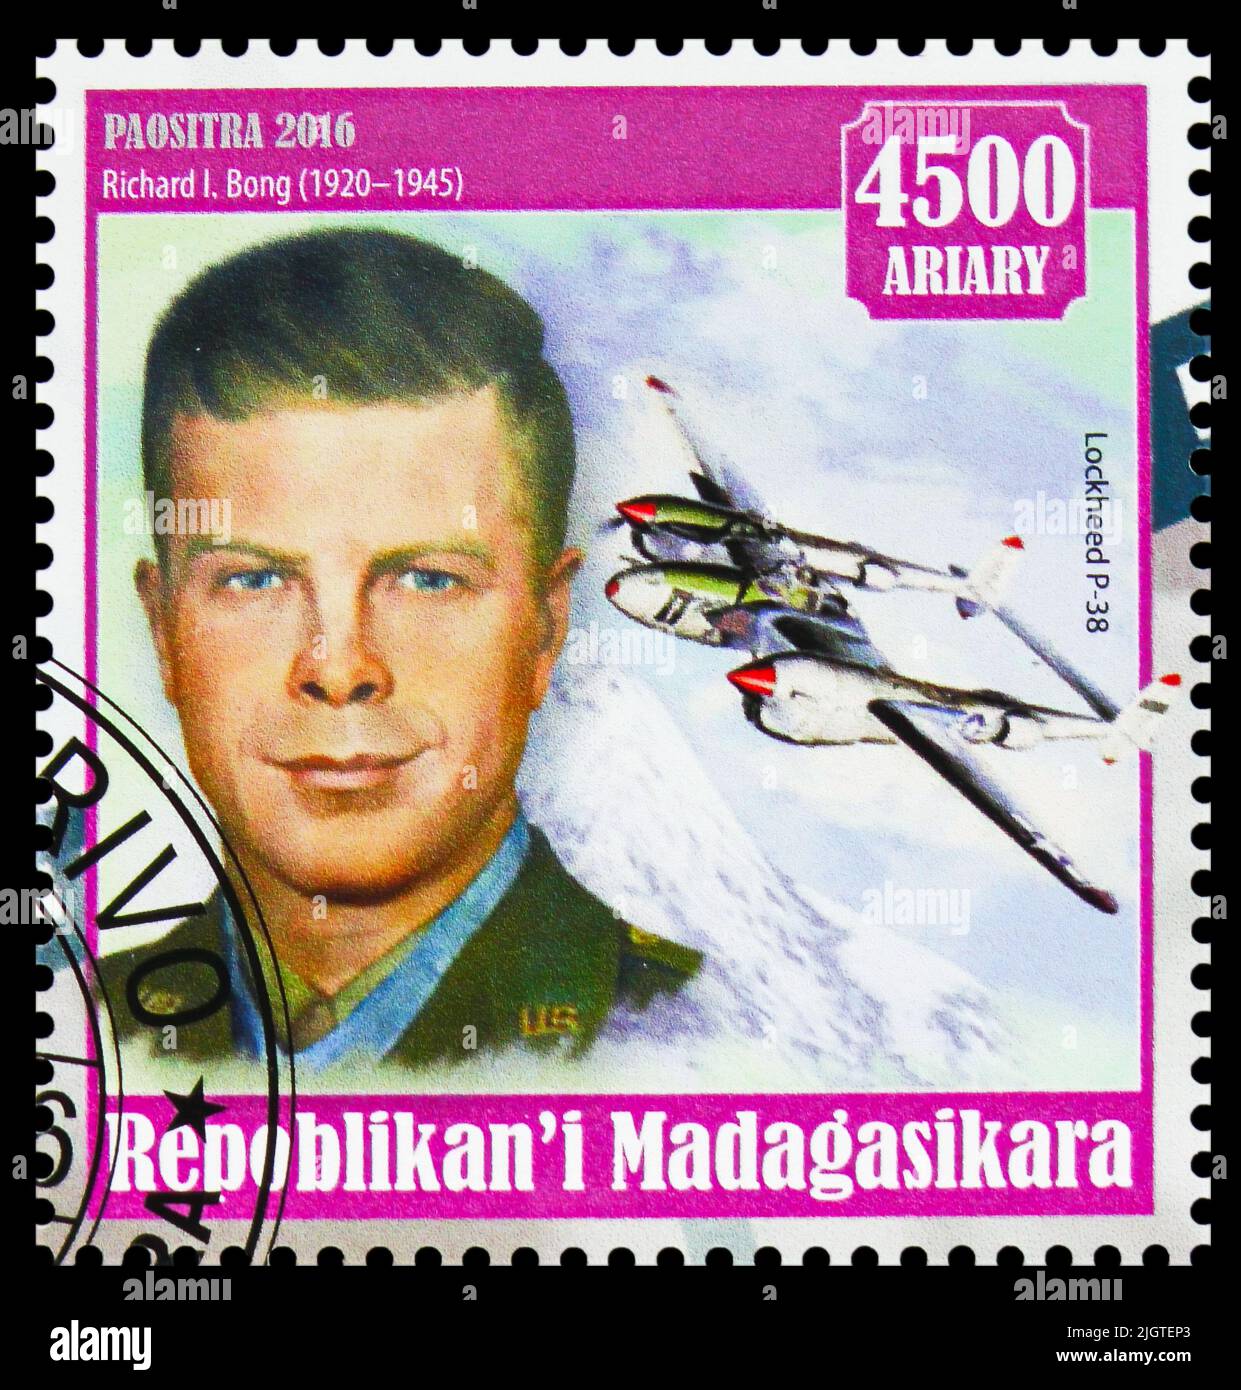 MOSCOW, RUSSIA - JUNE 17, 2022: Postage stamp printed in Madagascar shows Richard I. Bong, The aces of the second world war serie, circa 2016 Stock Photo